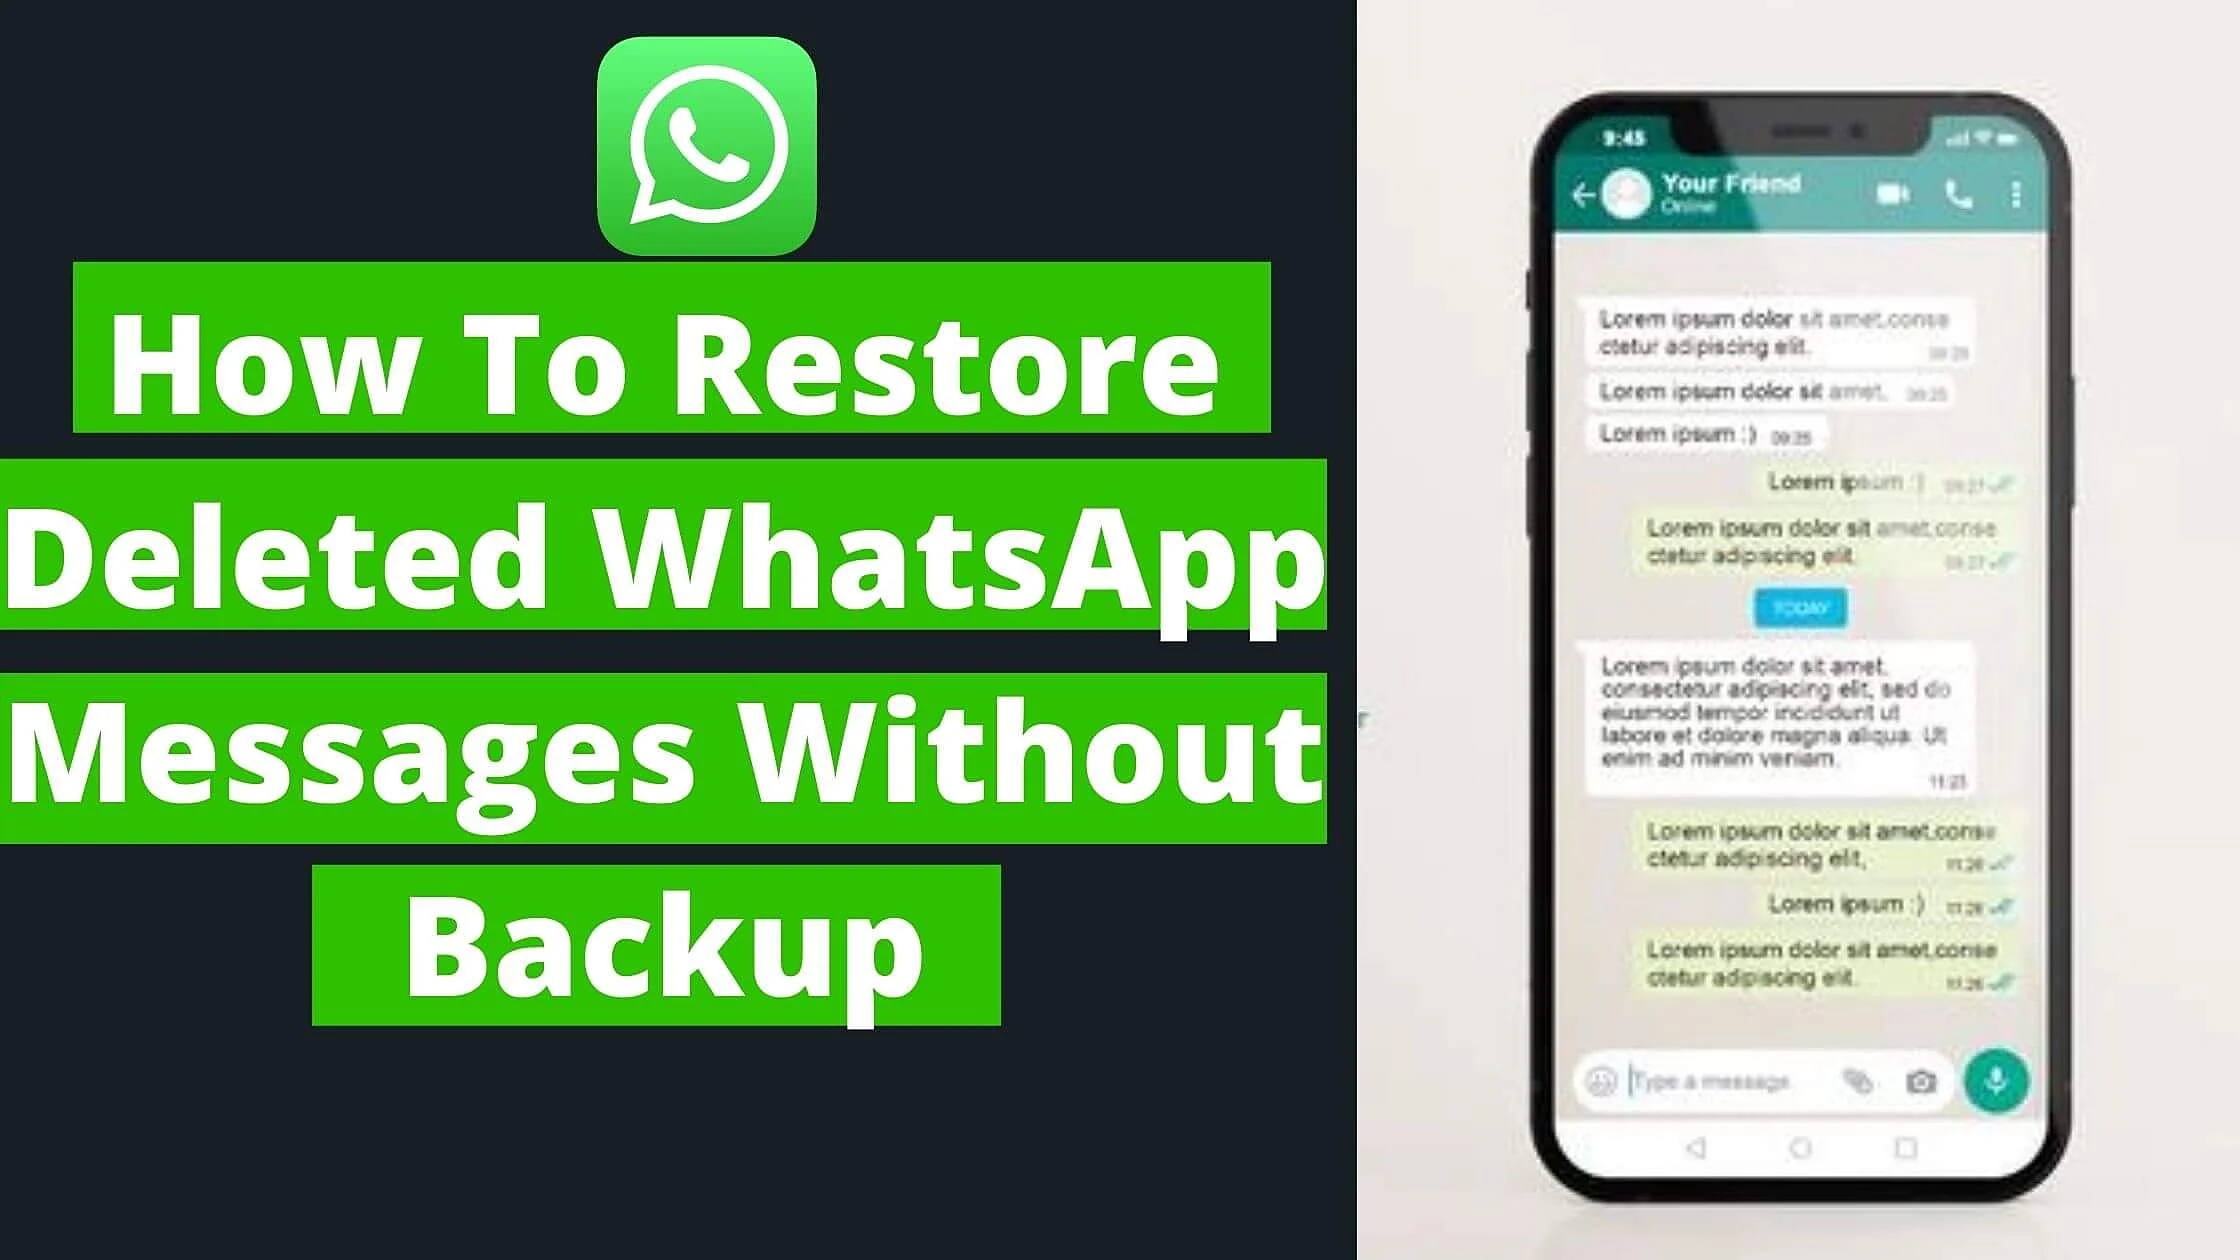 How To Restore Deleted WhatsApp Messages Without Backup